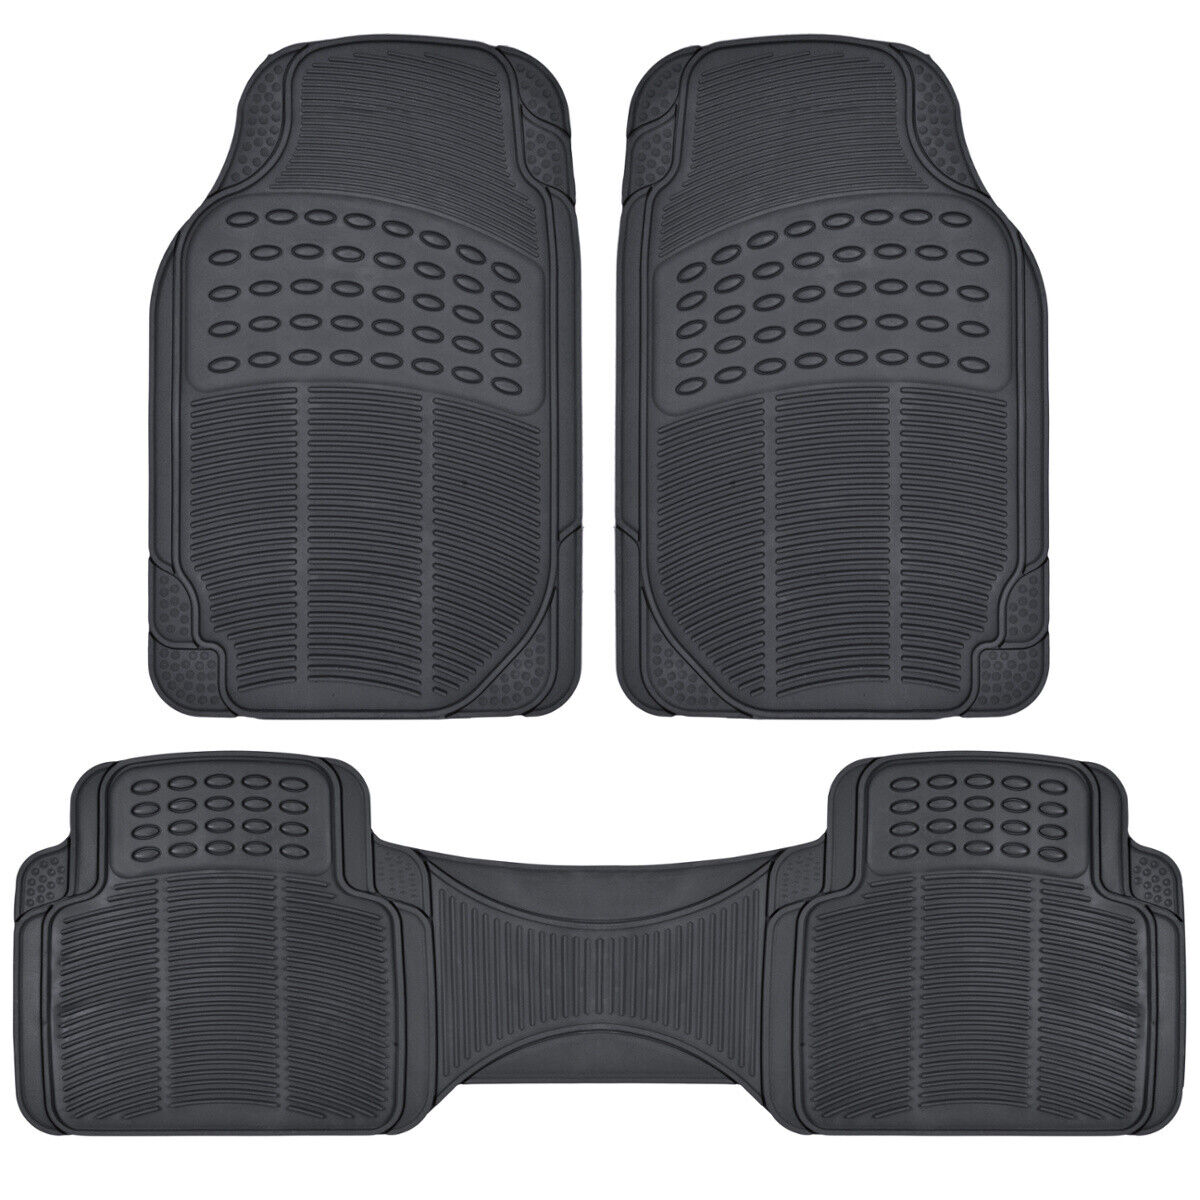 Rubber Floor Mats Car All Weather Heavy Duty Car Mats Liners Black Beige or Gray